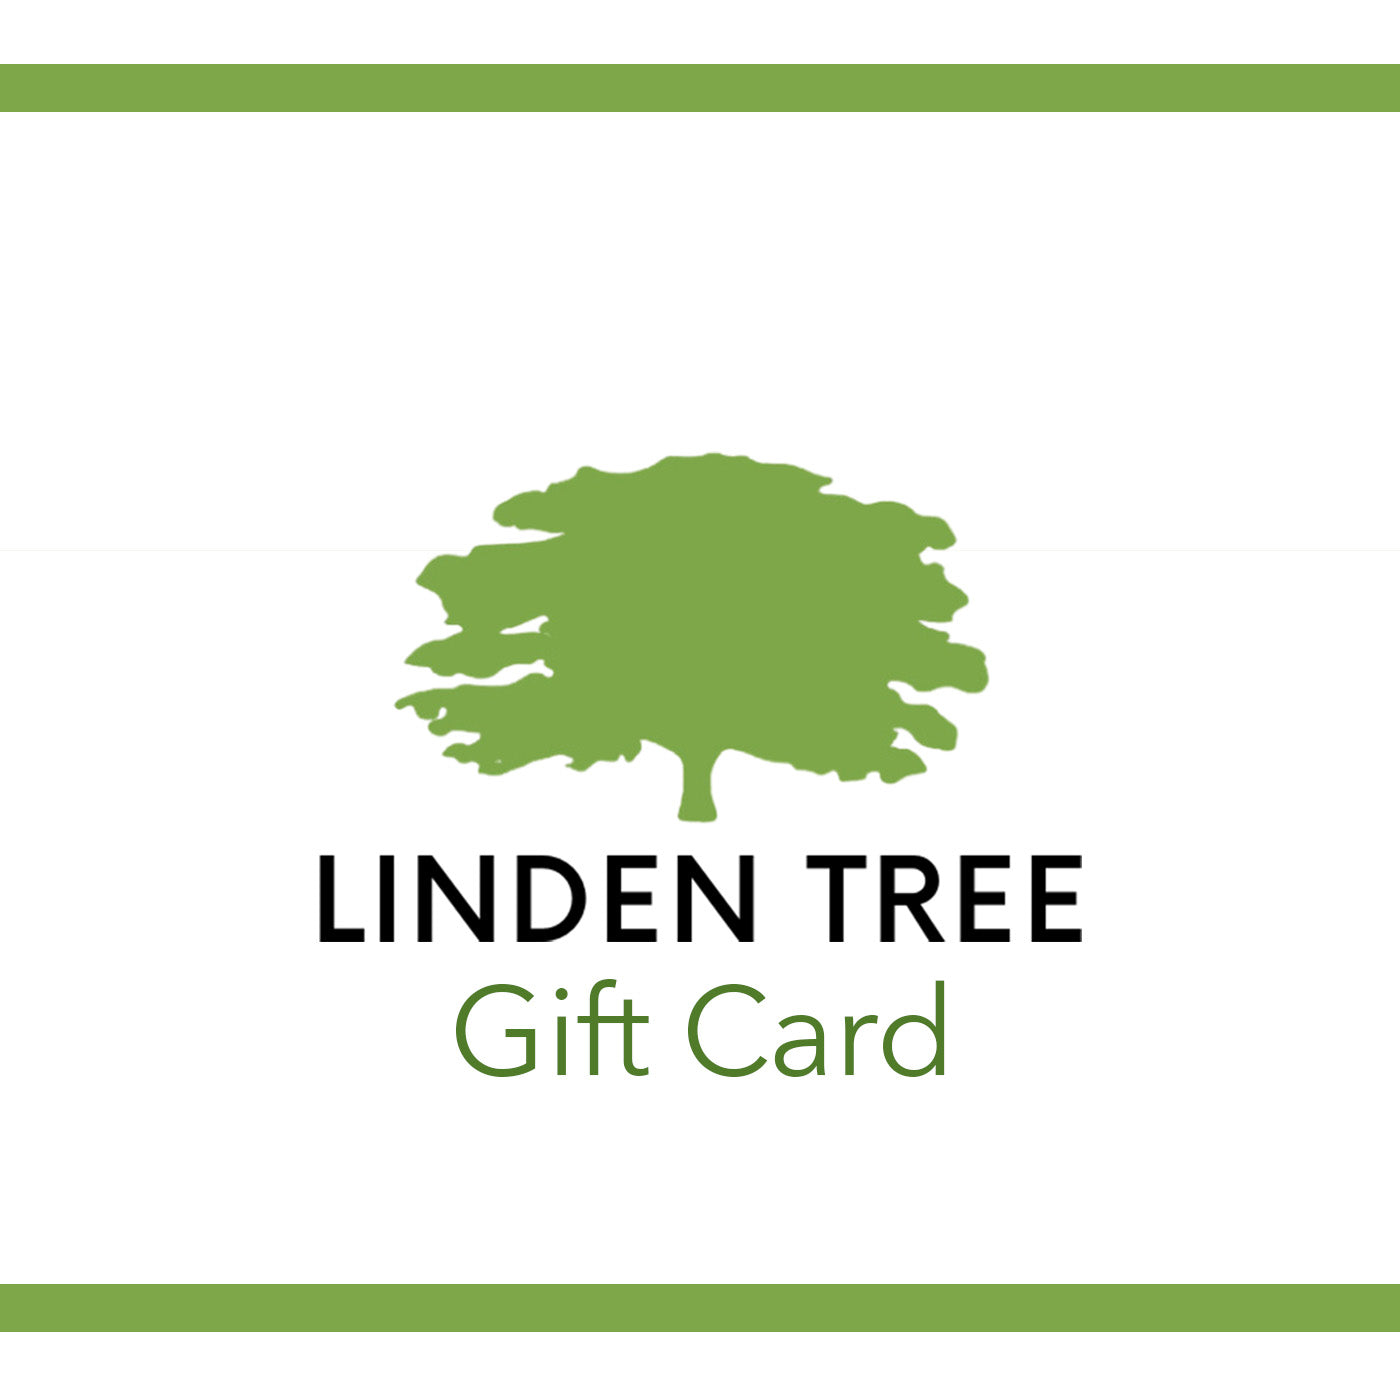 Linden Tree Gift Card